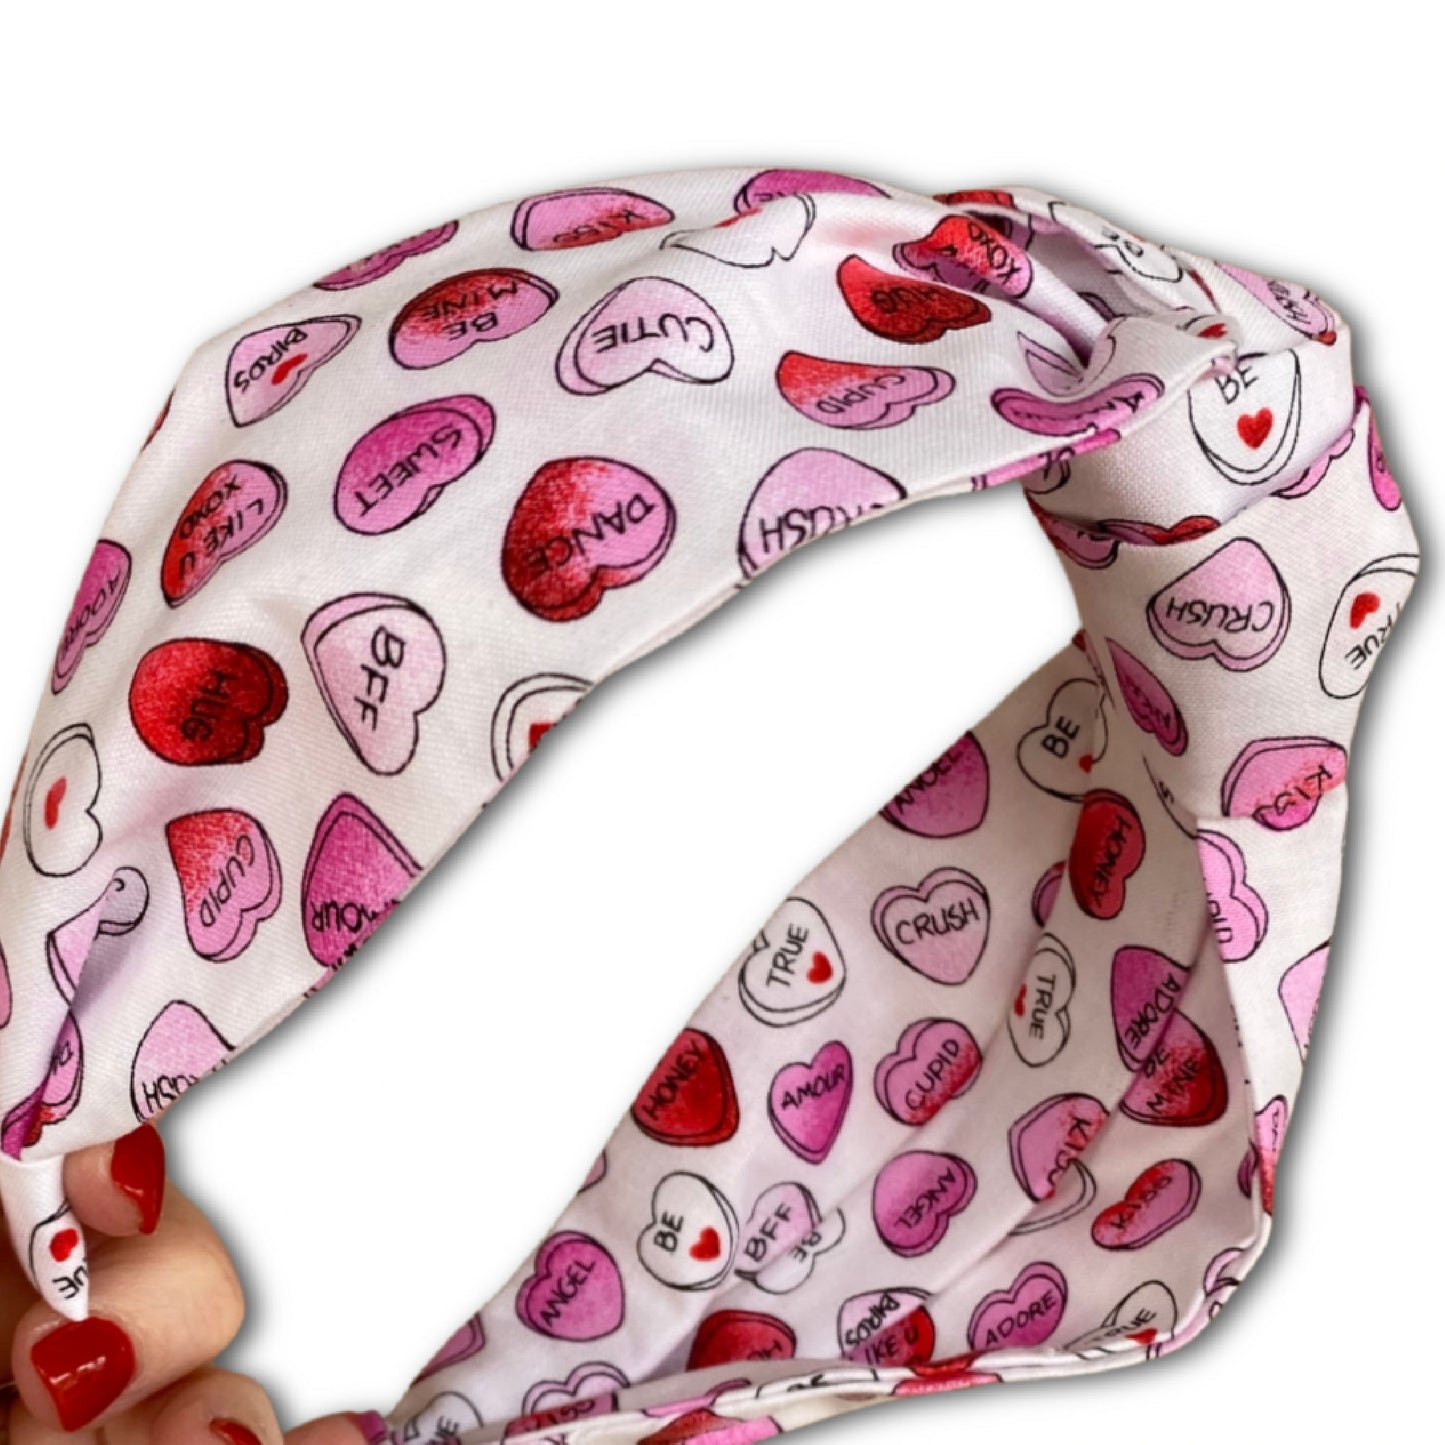 Headband that features pink and red conversation hearts throughout